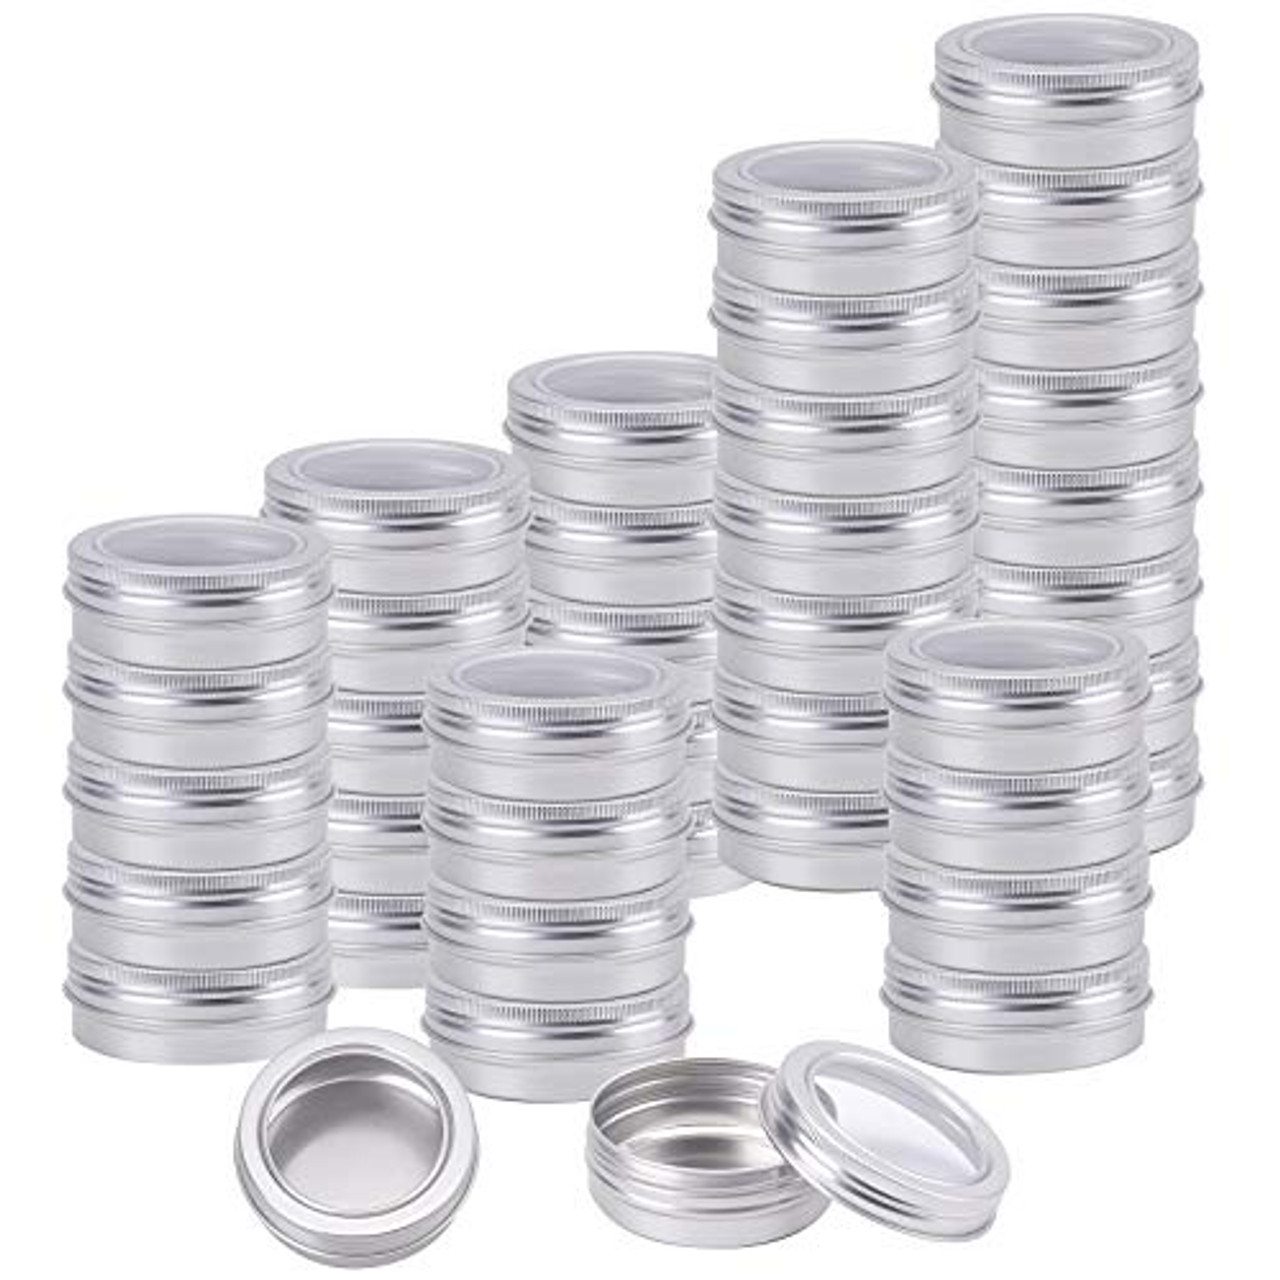 Foraineam 48 Pack 4 oz Screw Lid Round Tins Aluminium Empty Tins Black  Metal Candle Storage Tin Jars Spice Containers Travel Tin Cans